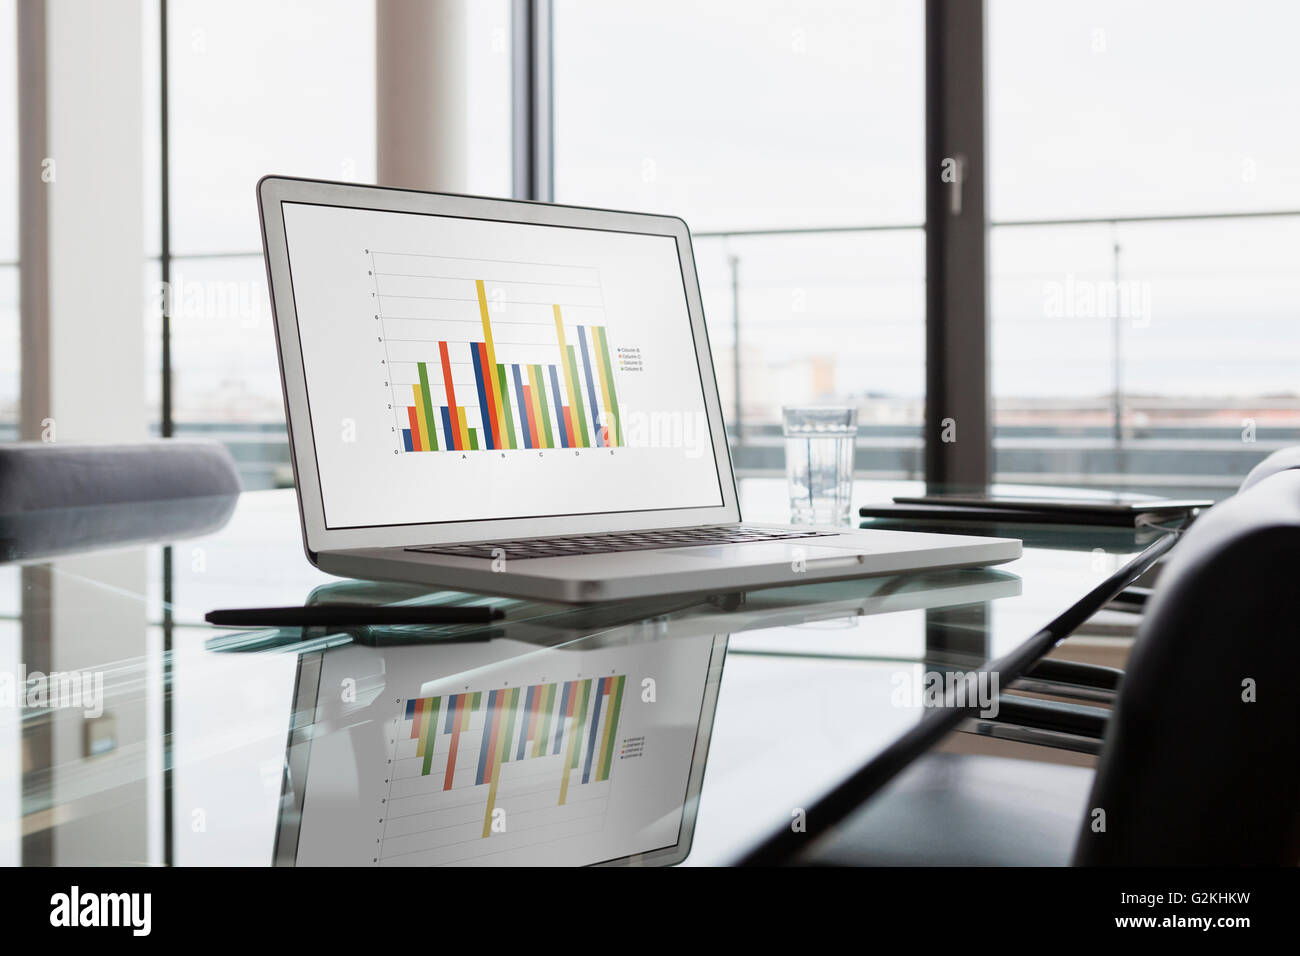 Laptop with bar chart on office desk Stock Photo